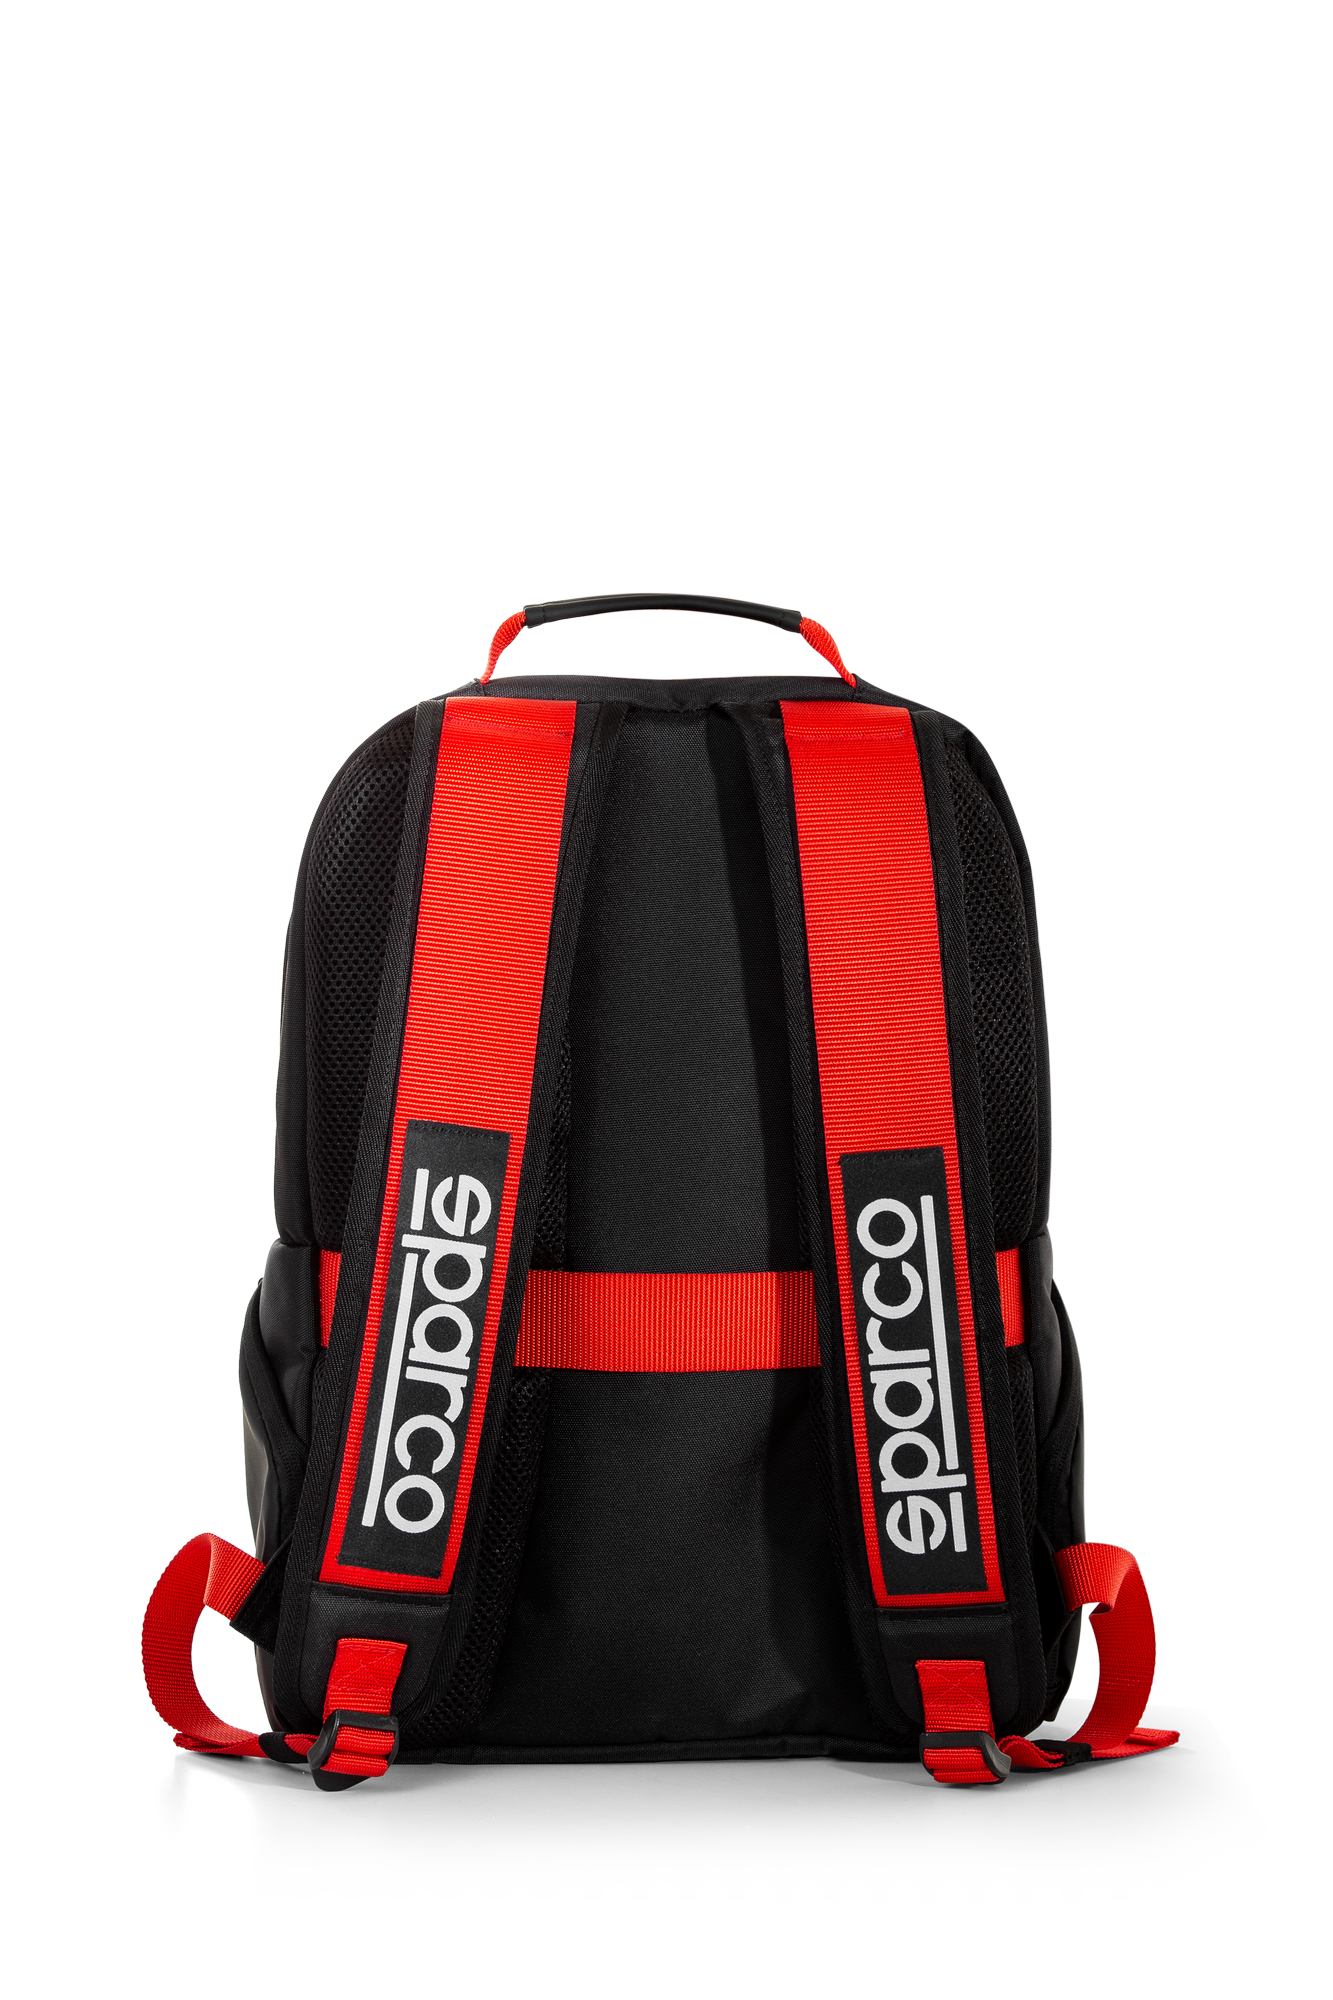 Backpack Sparco Stage Black/Red